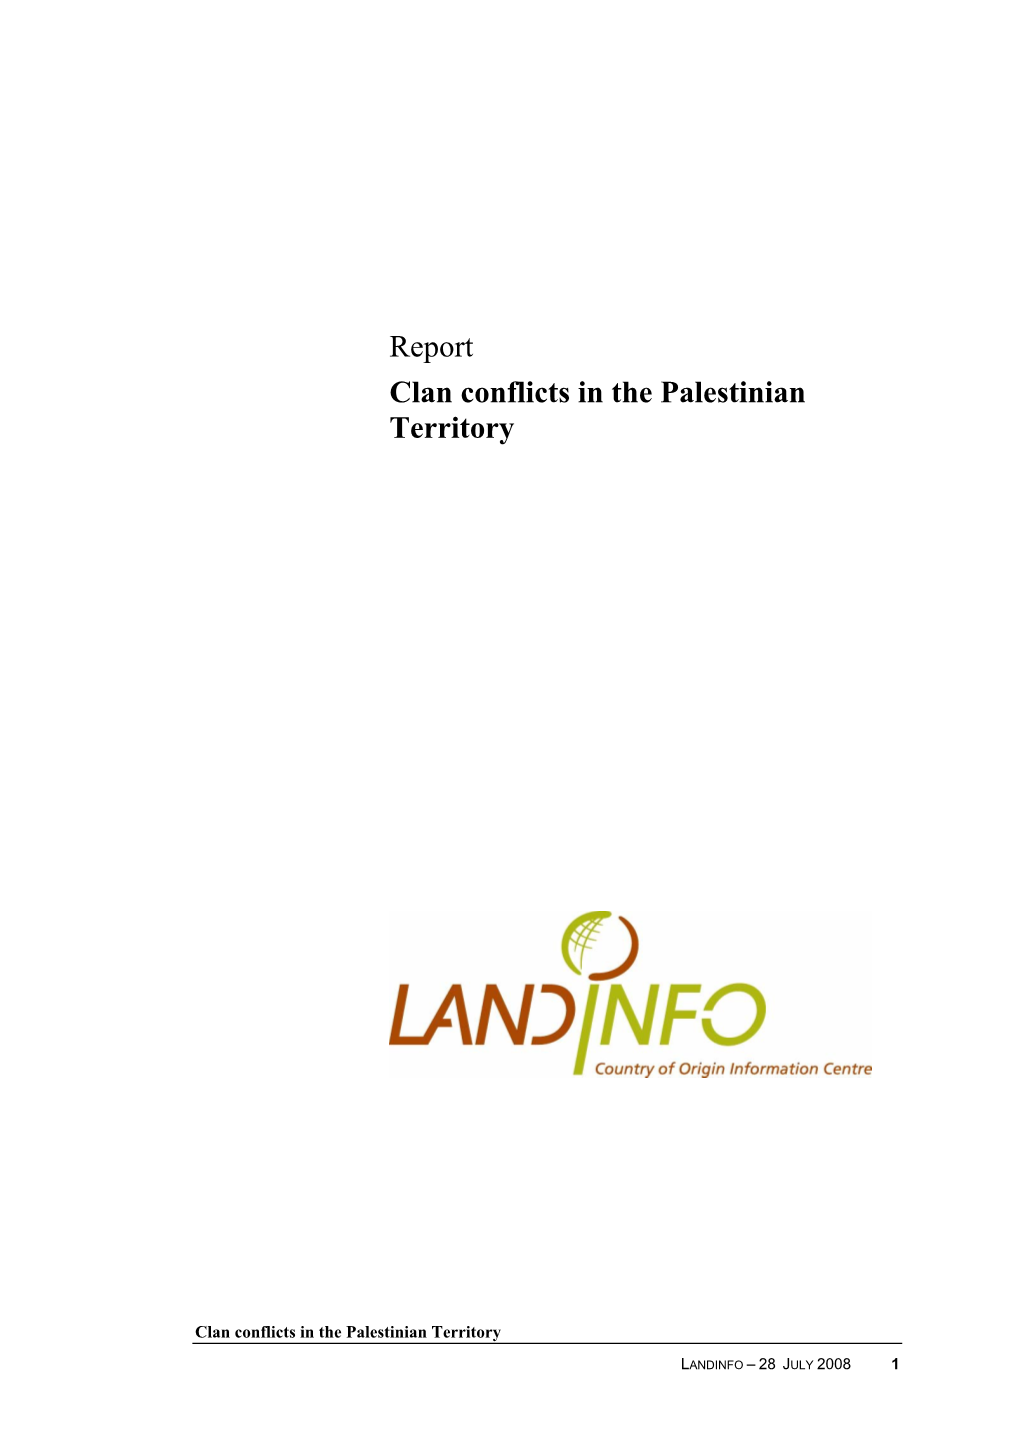 Report Clan Conflicts in the Palestinian Territory